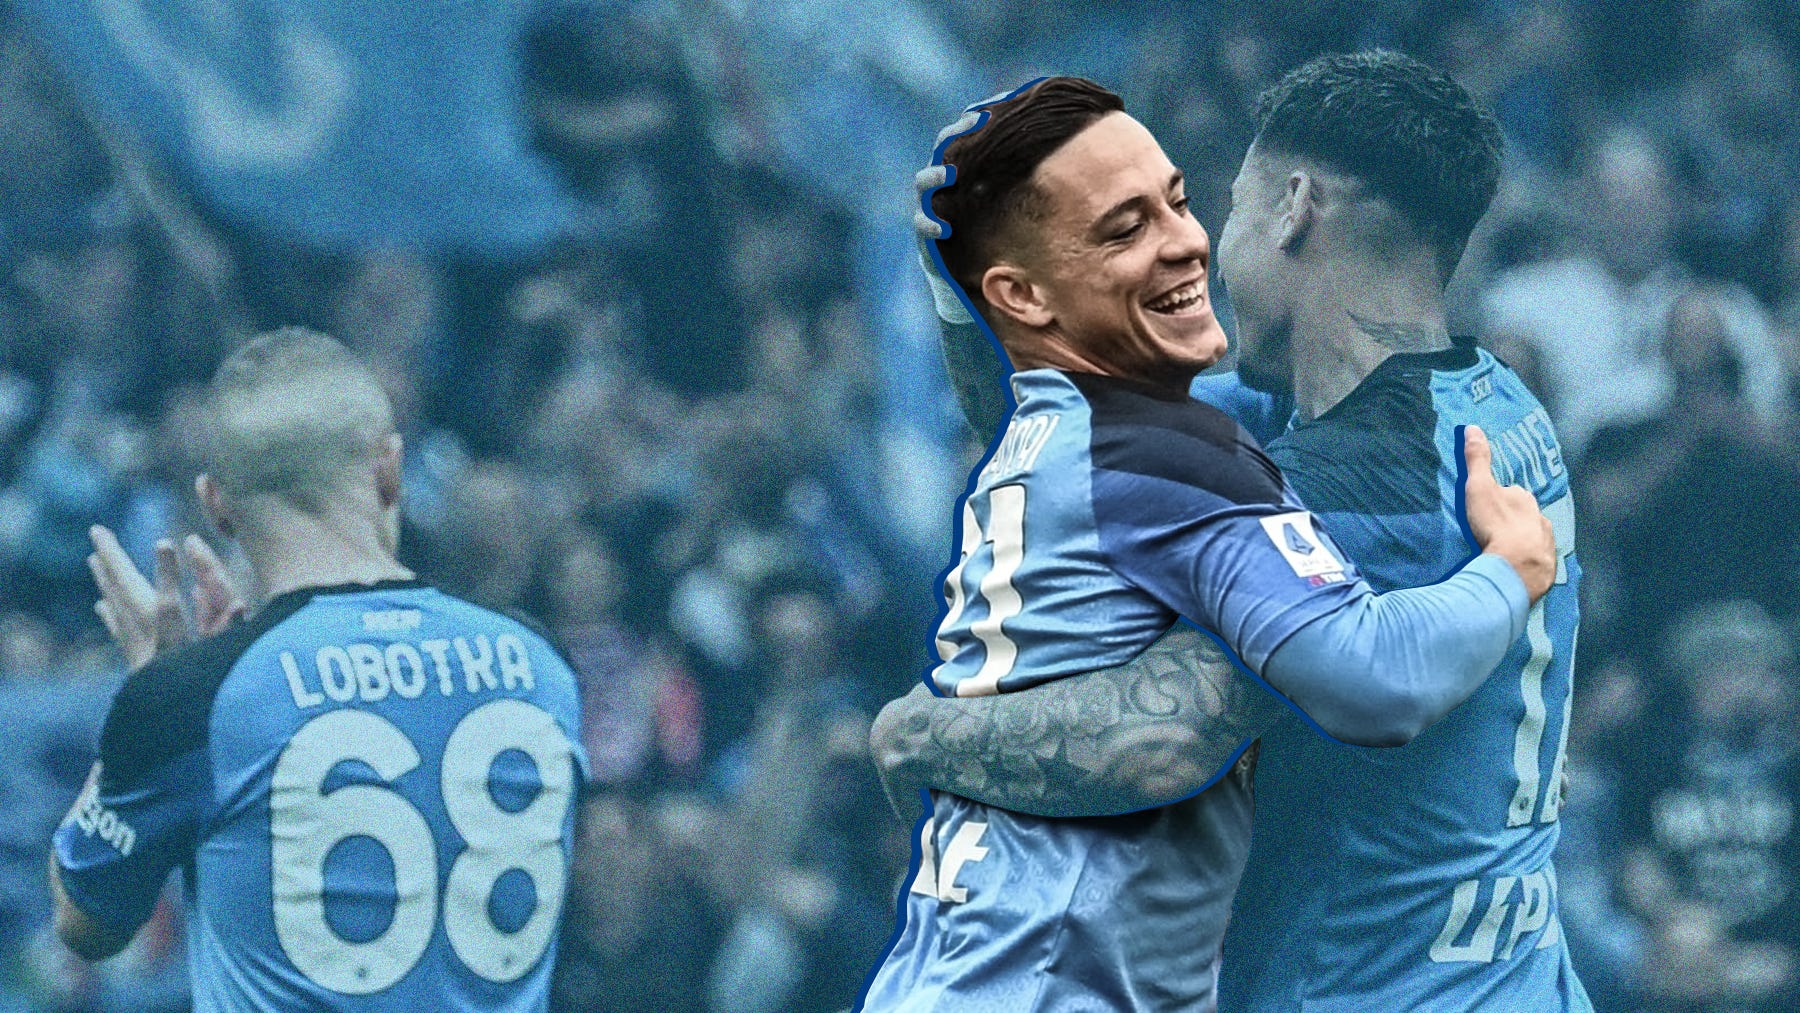 An edited photo of Giacomo Raspadori hugging team-mates Mathis Olivera with Stanislav Lobotka clapping fans behind them. Raspadori is in clear colours while the rest of the image is covered in a light blue hue